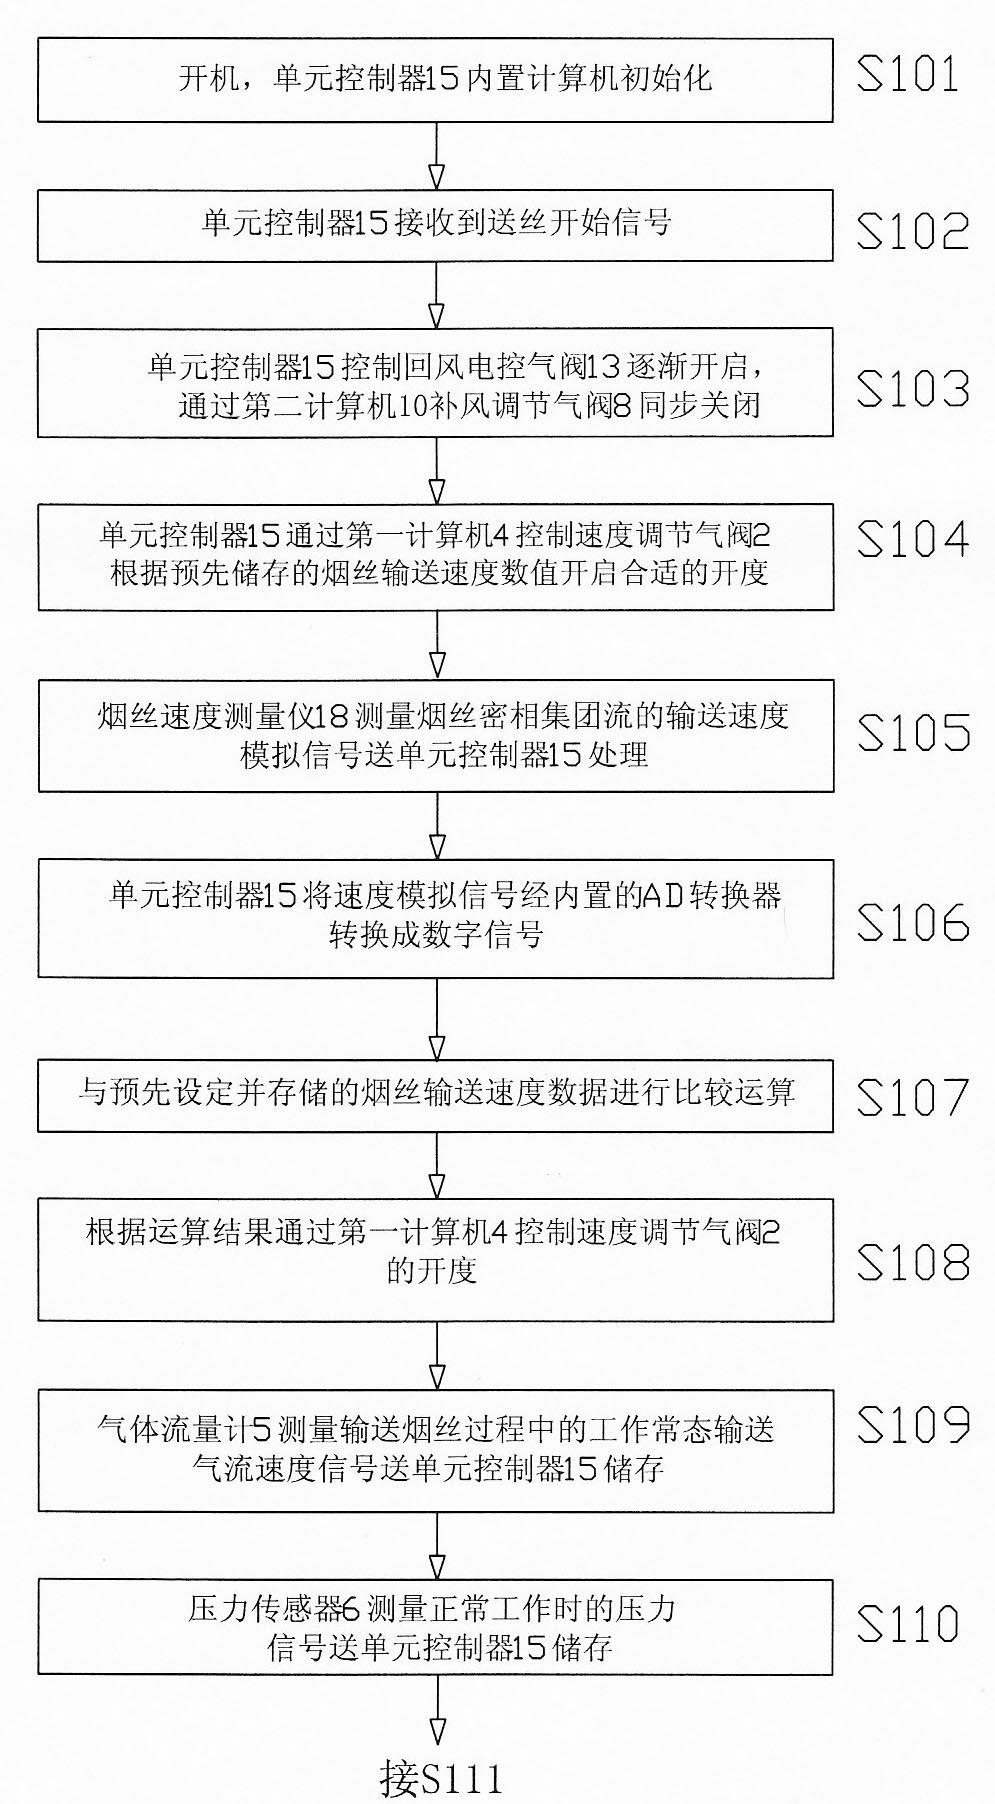 Flexible control device for pneumatically conveying tobacco shreds and control method